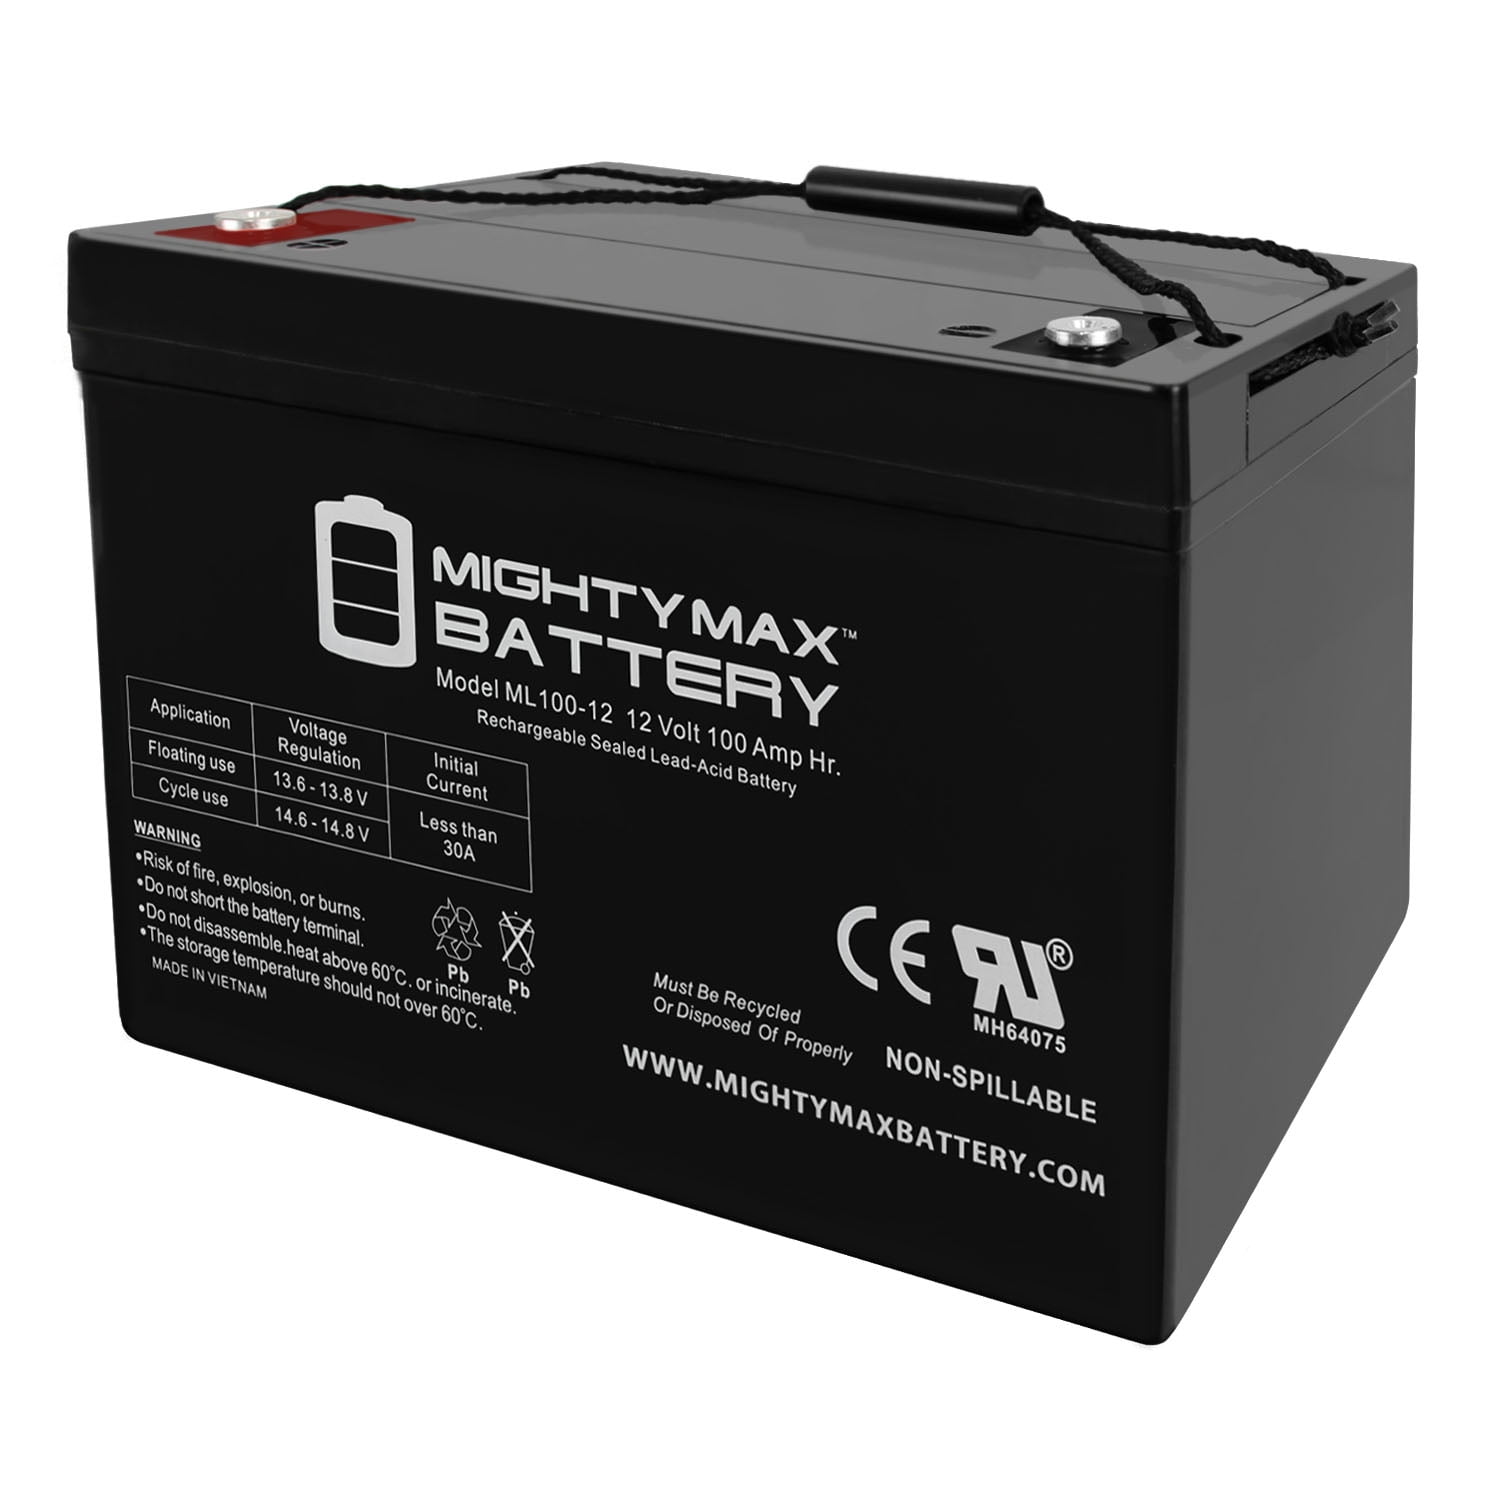 Mighty Max Battery 12V 100AH Gel Battery Replacement for APC SILCON SL80KF Brand Product 